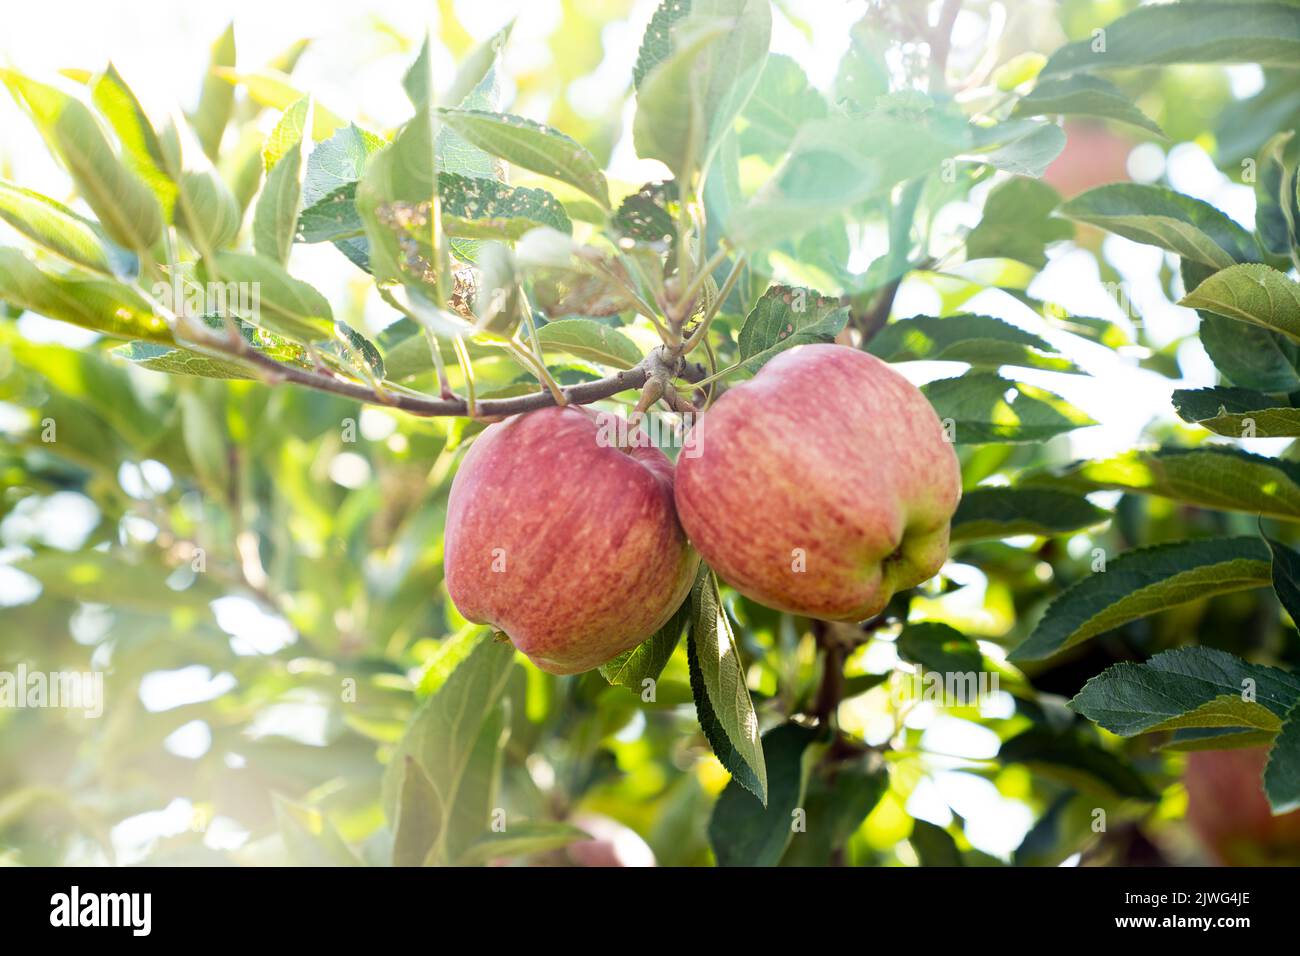 Ripe red apple on a branch of an apple tree Stock Photo